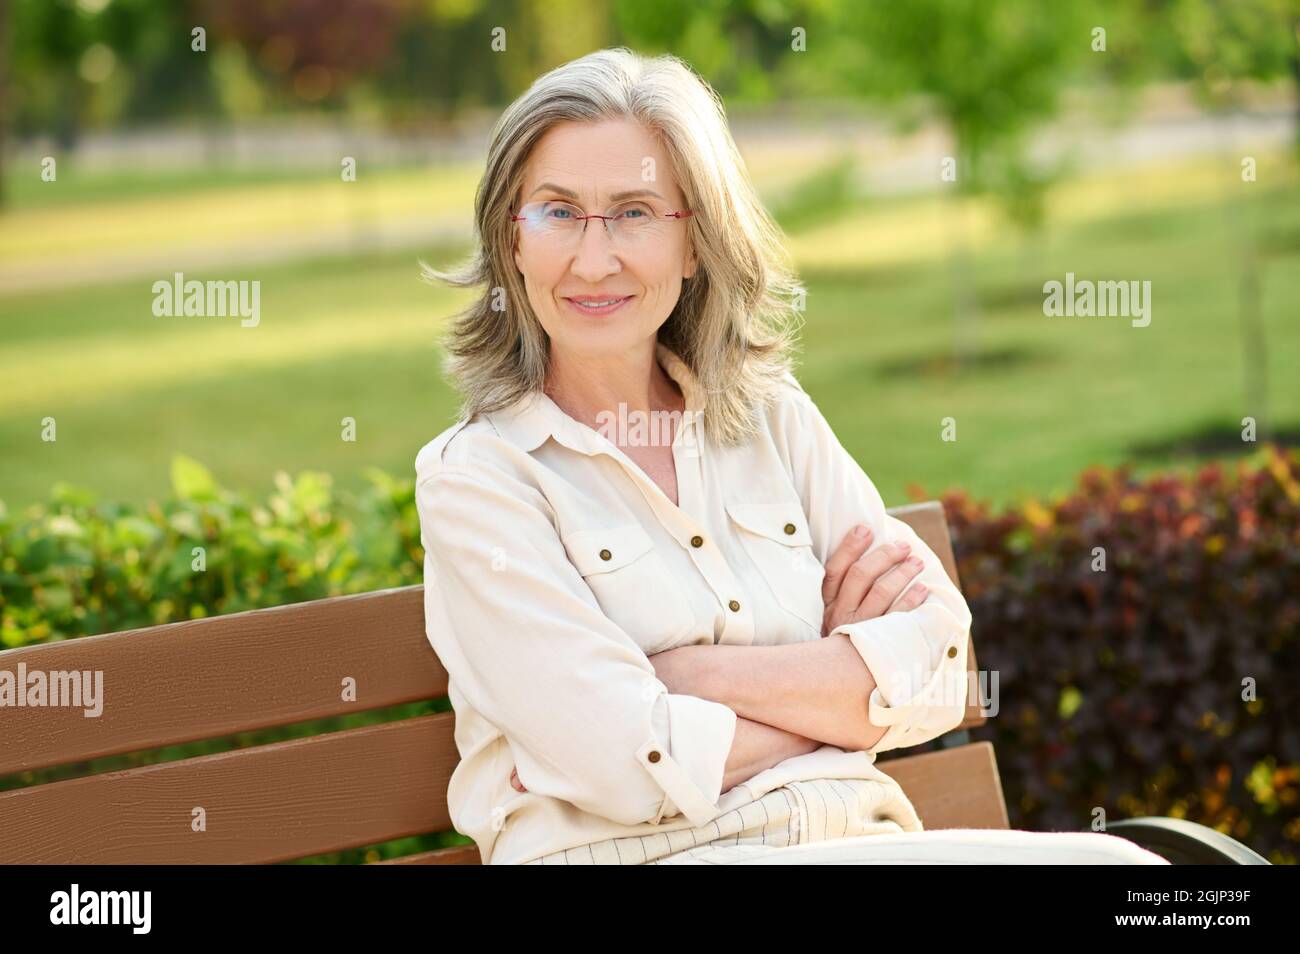 Pretty woman with glasses looking smiling Stock Photo